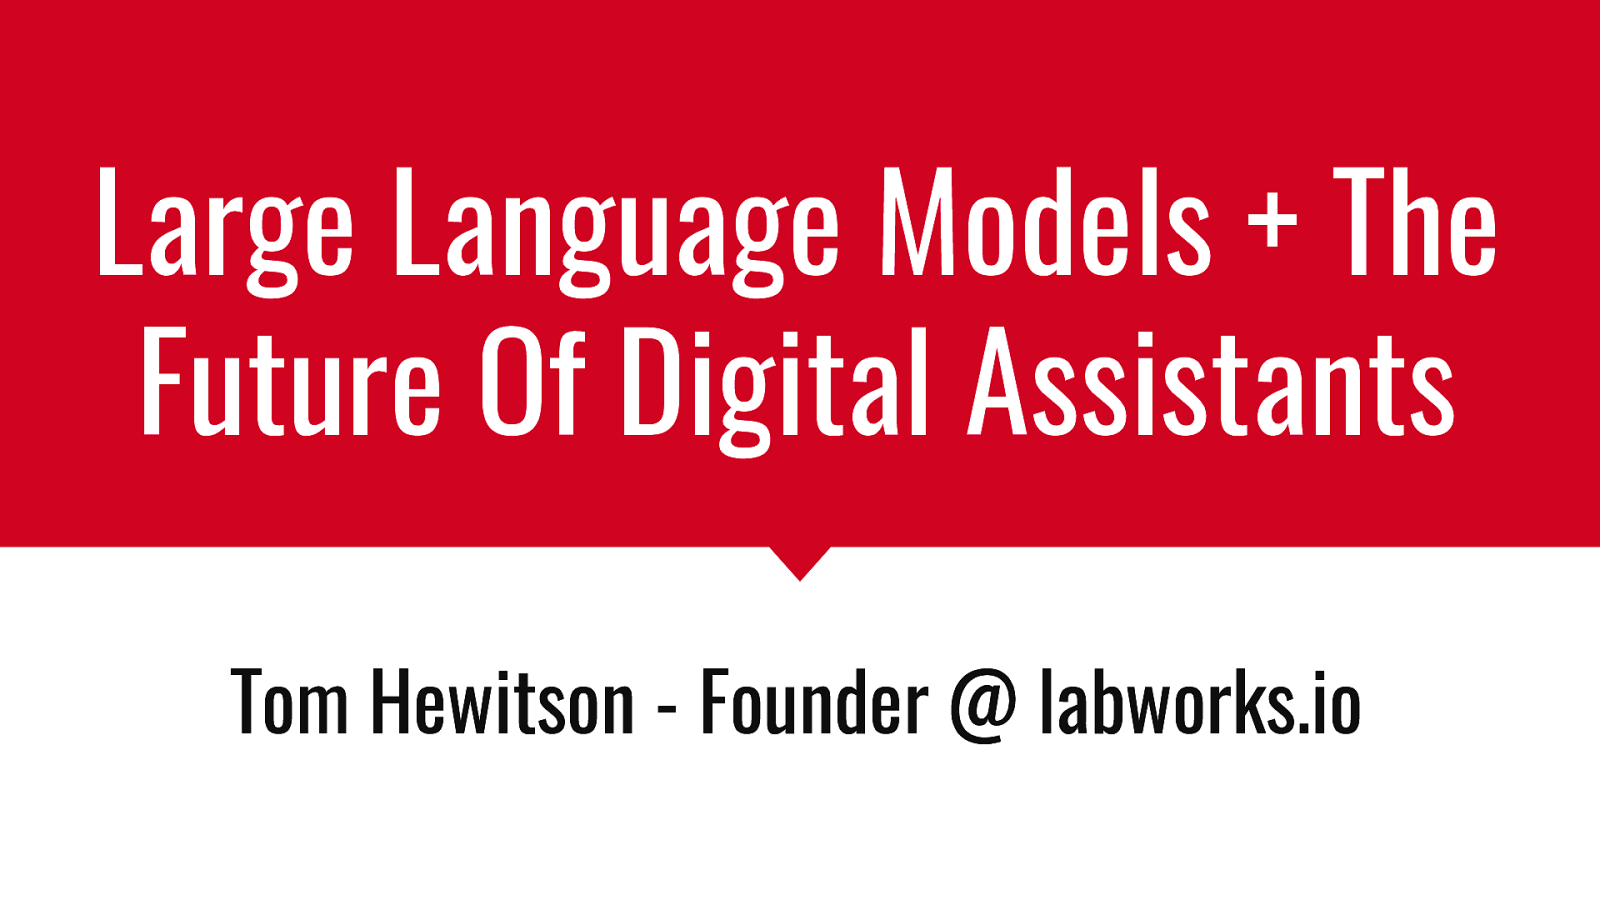 Large Language Models + The Future Of Digital Assistants with Tom Hewitson